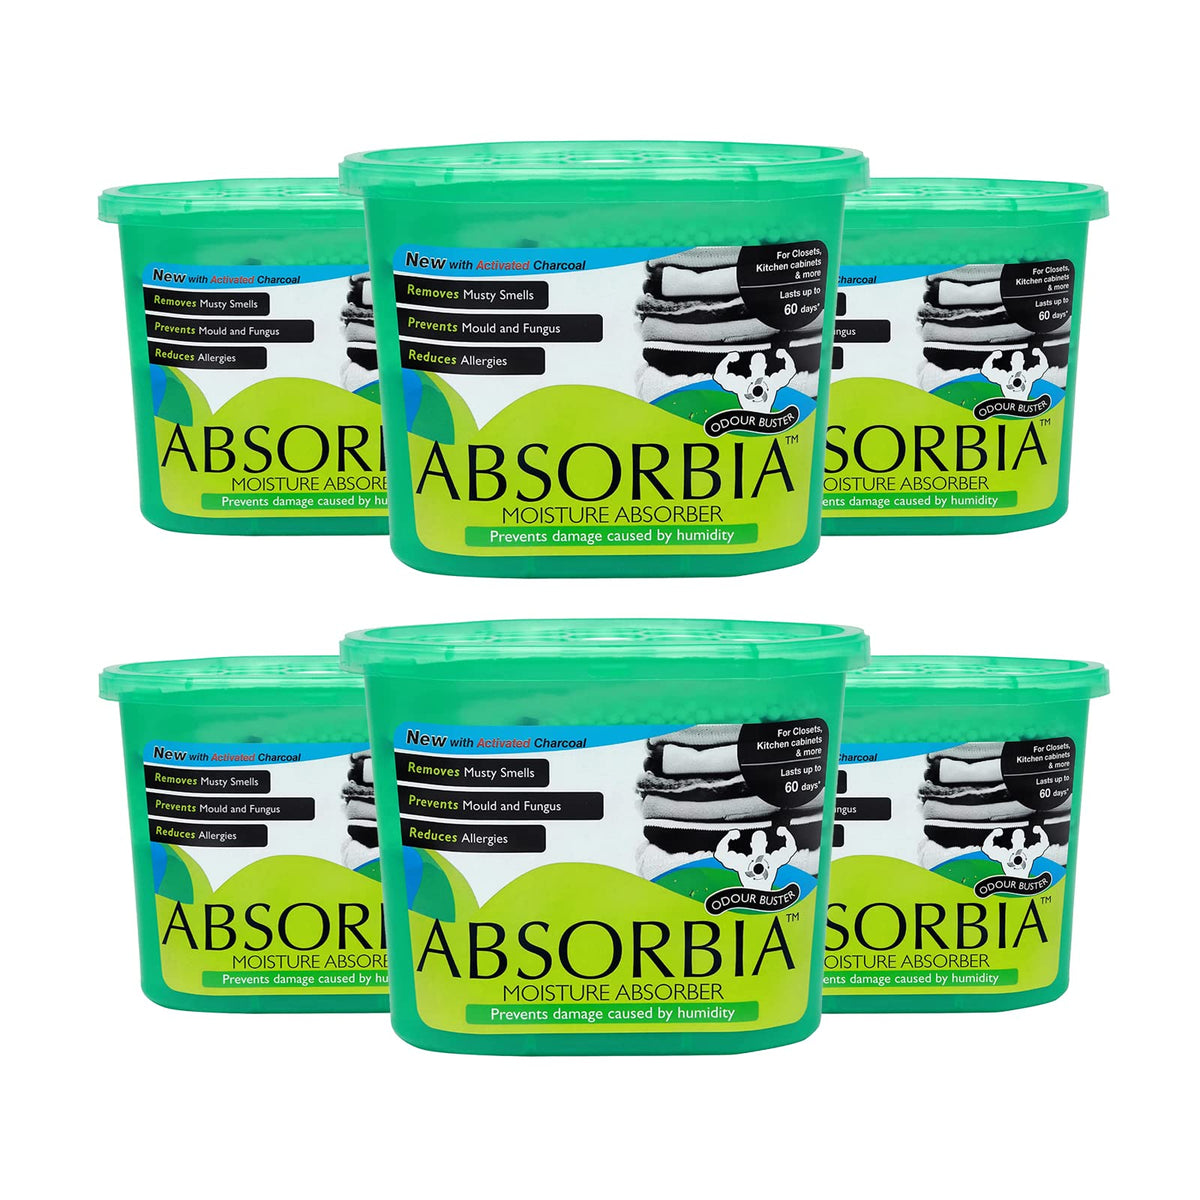 Absorbia Moisture Absorber and Odour Buster with Activated Charcoal - 300 g (Pack of 6) Absorption Capacity 600ml Each | Dehumidier for Wardrobe, Cupboards & Closets | Fights Against Mould